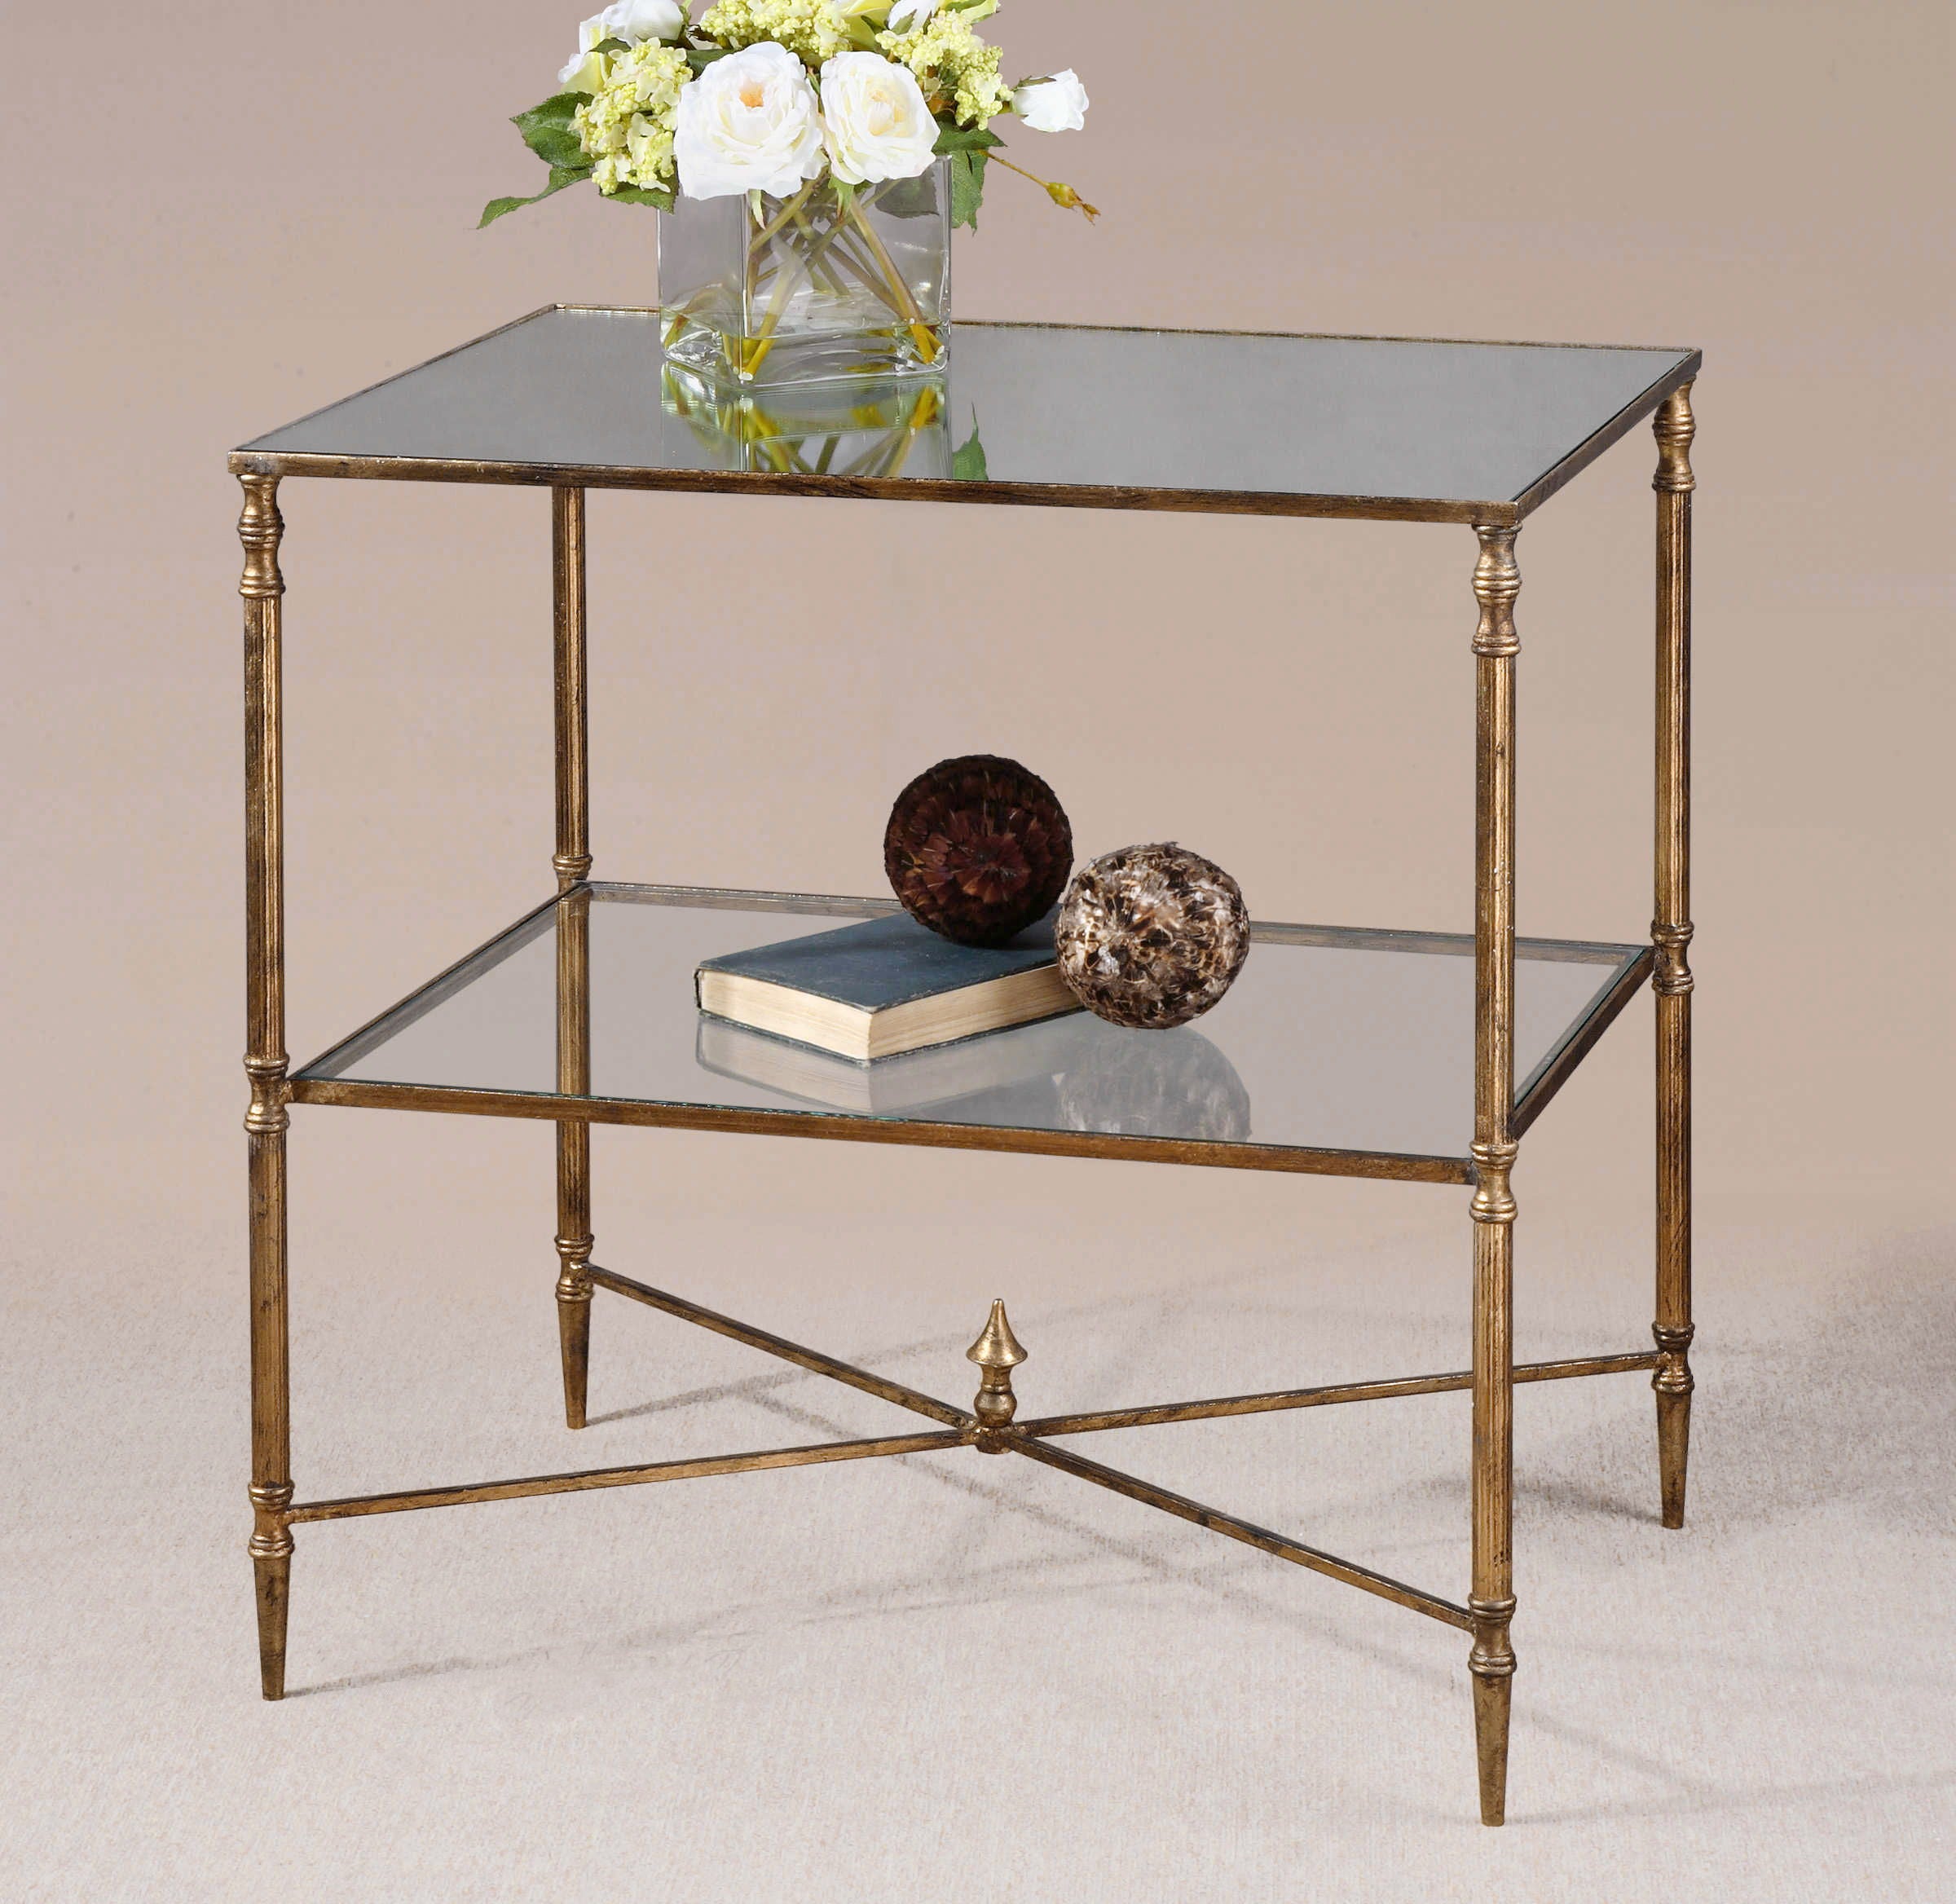 Henzler - Mirrored Glass Lamp Table - Gold